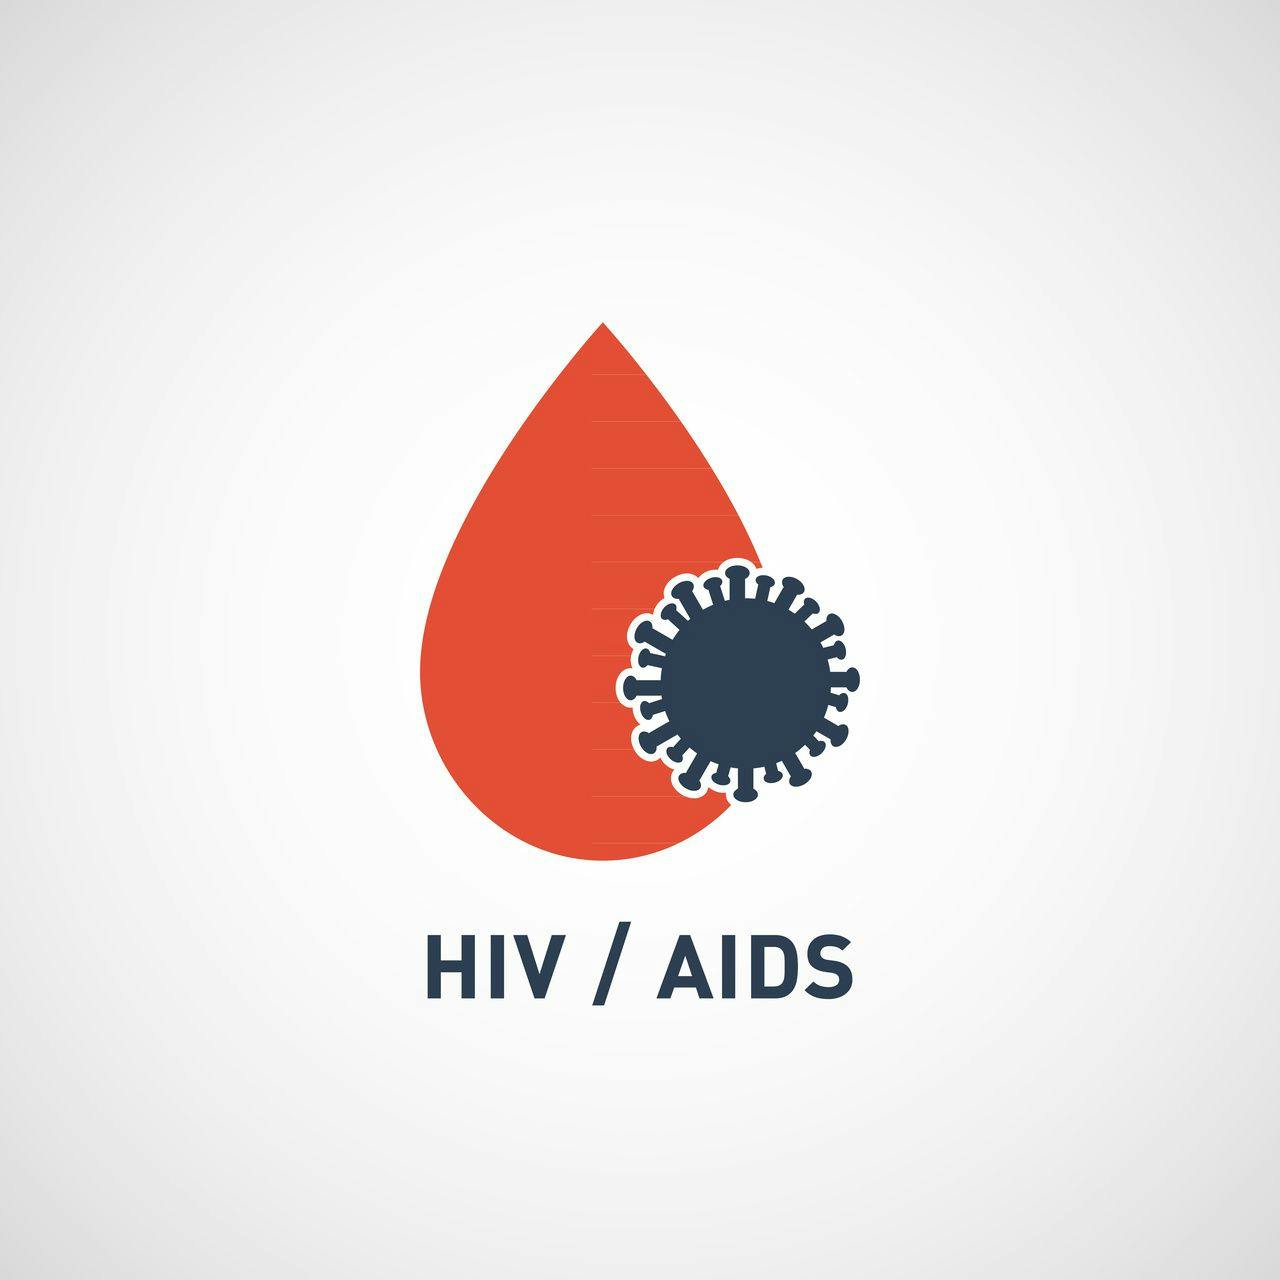 FDA Approves HIV Drug for Adults With Multidrug-Resistant Infection